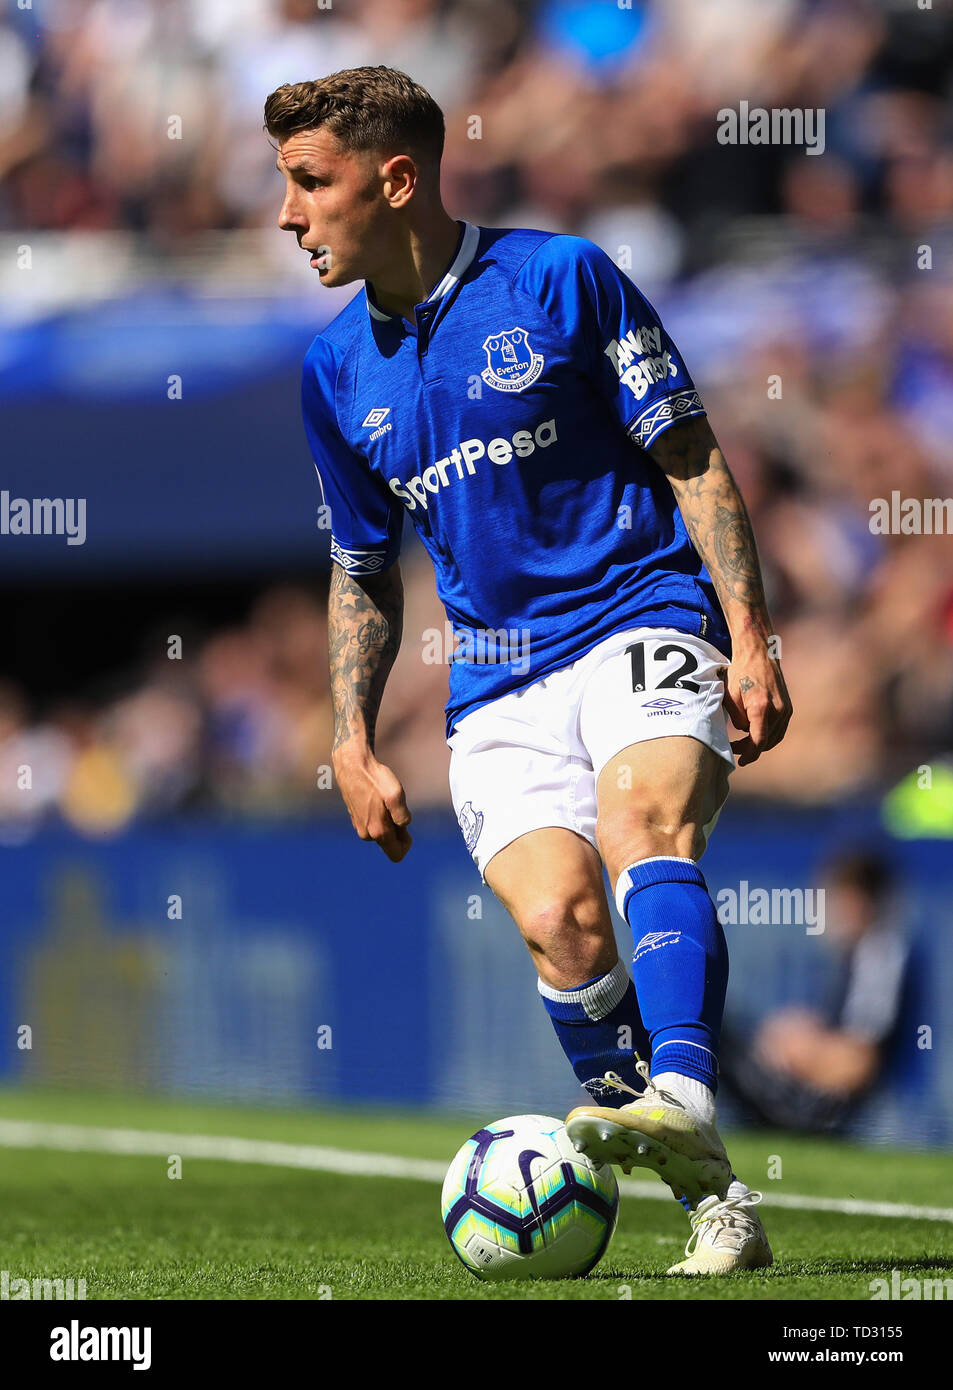 Lucas Digne of Everton - Tottenham Hotspur v Everton, Premier League, Tottenham Hotspur Stadium, London - 12th May 2019  Editorial Use Only - DataCo restrictions apply Stock Photo